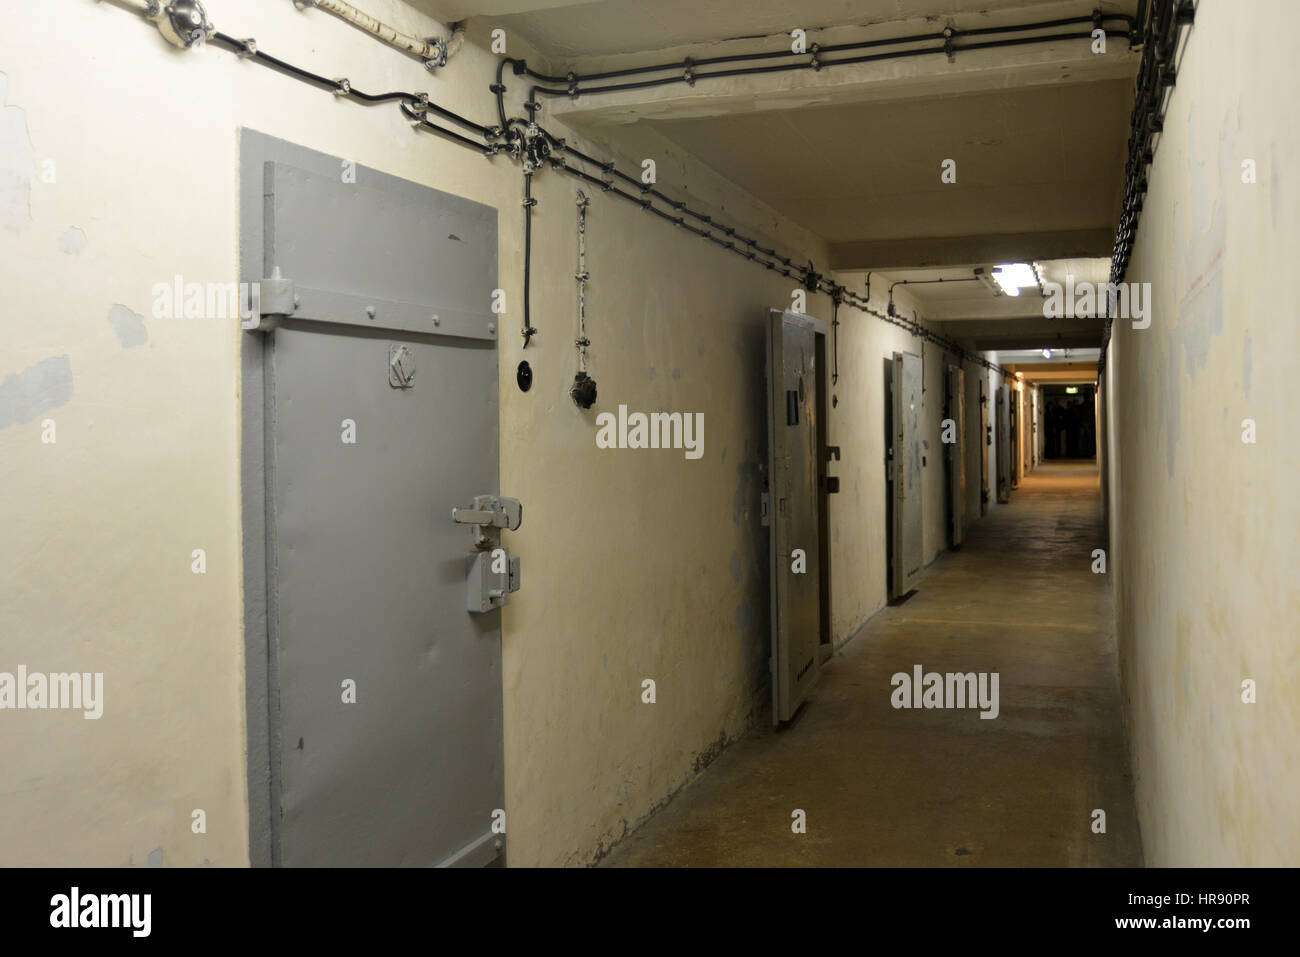 Gedenkstätte Berlin-Hohenschönhausen, Germany, April 23 2016. Cell doors in a corridor, over 20,000 people were detained from 1945 to 1990 in the pris Stock Photo